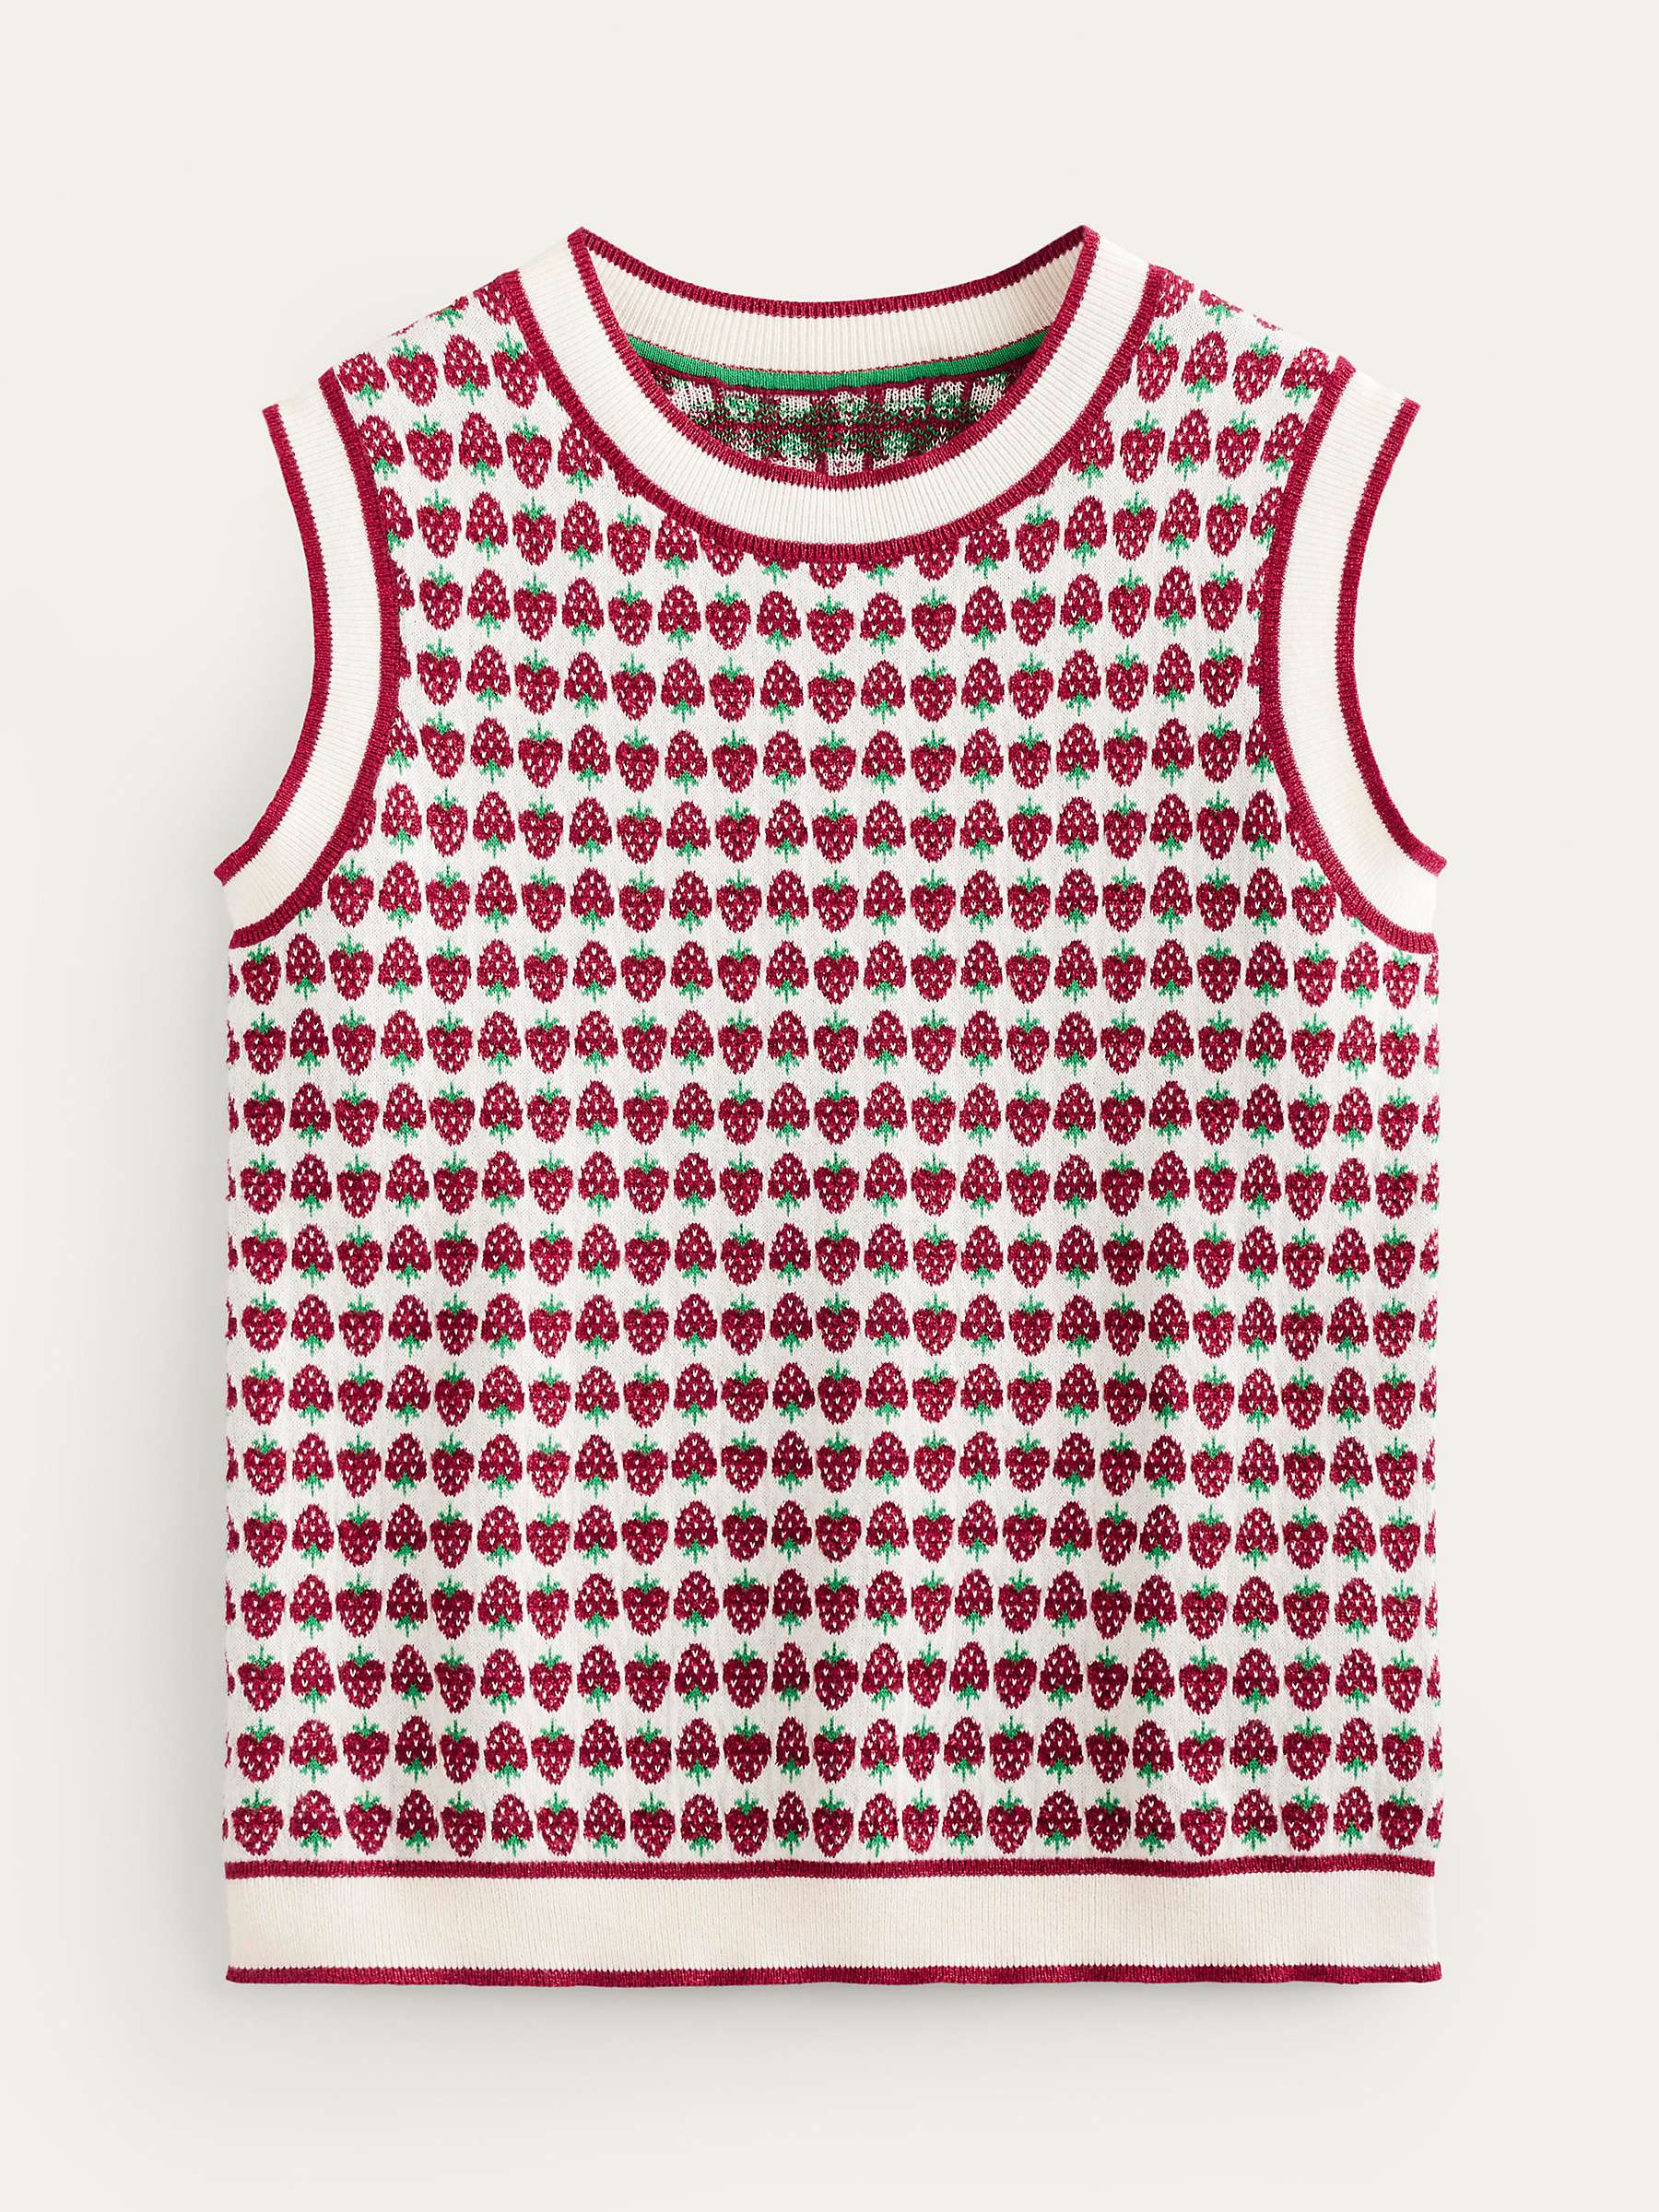 Buy Boden Sparkle Strawberry Fair Isle Knit Tank Top, Multi Online at johnlewis.com